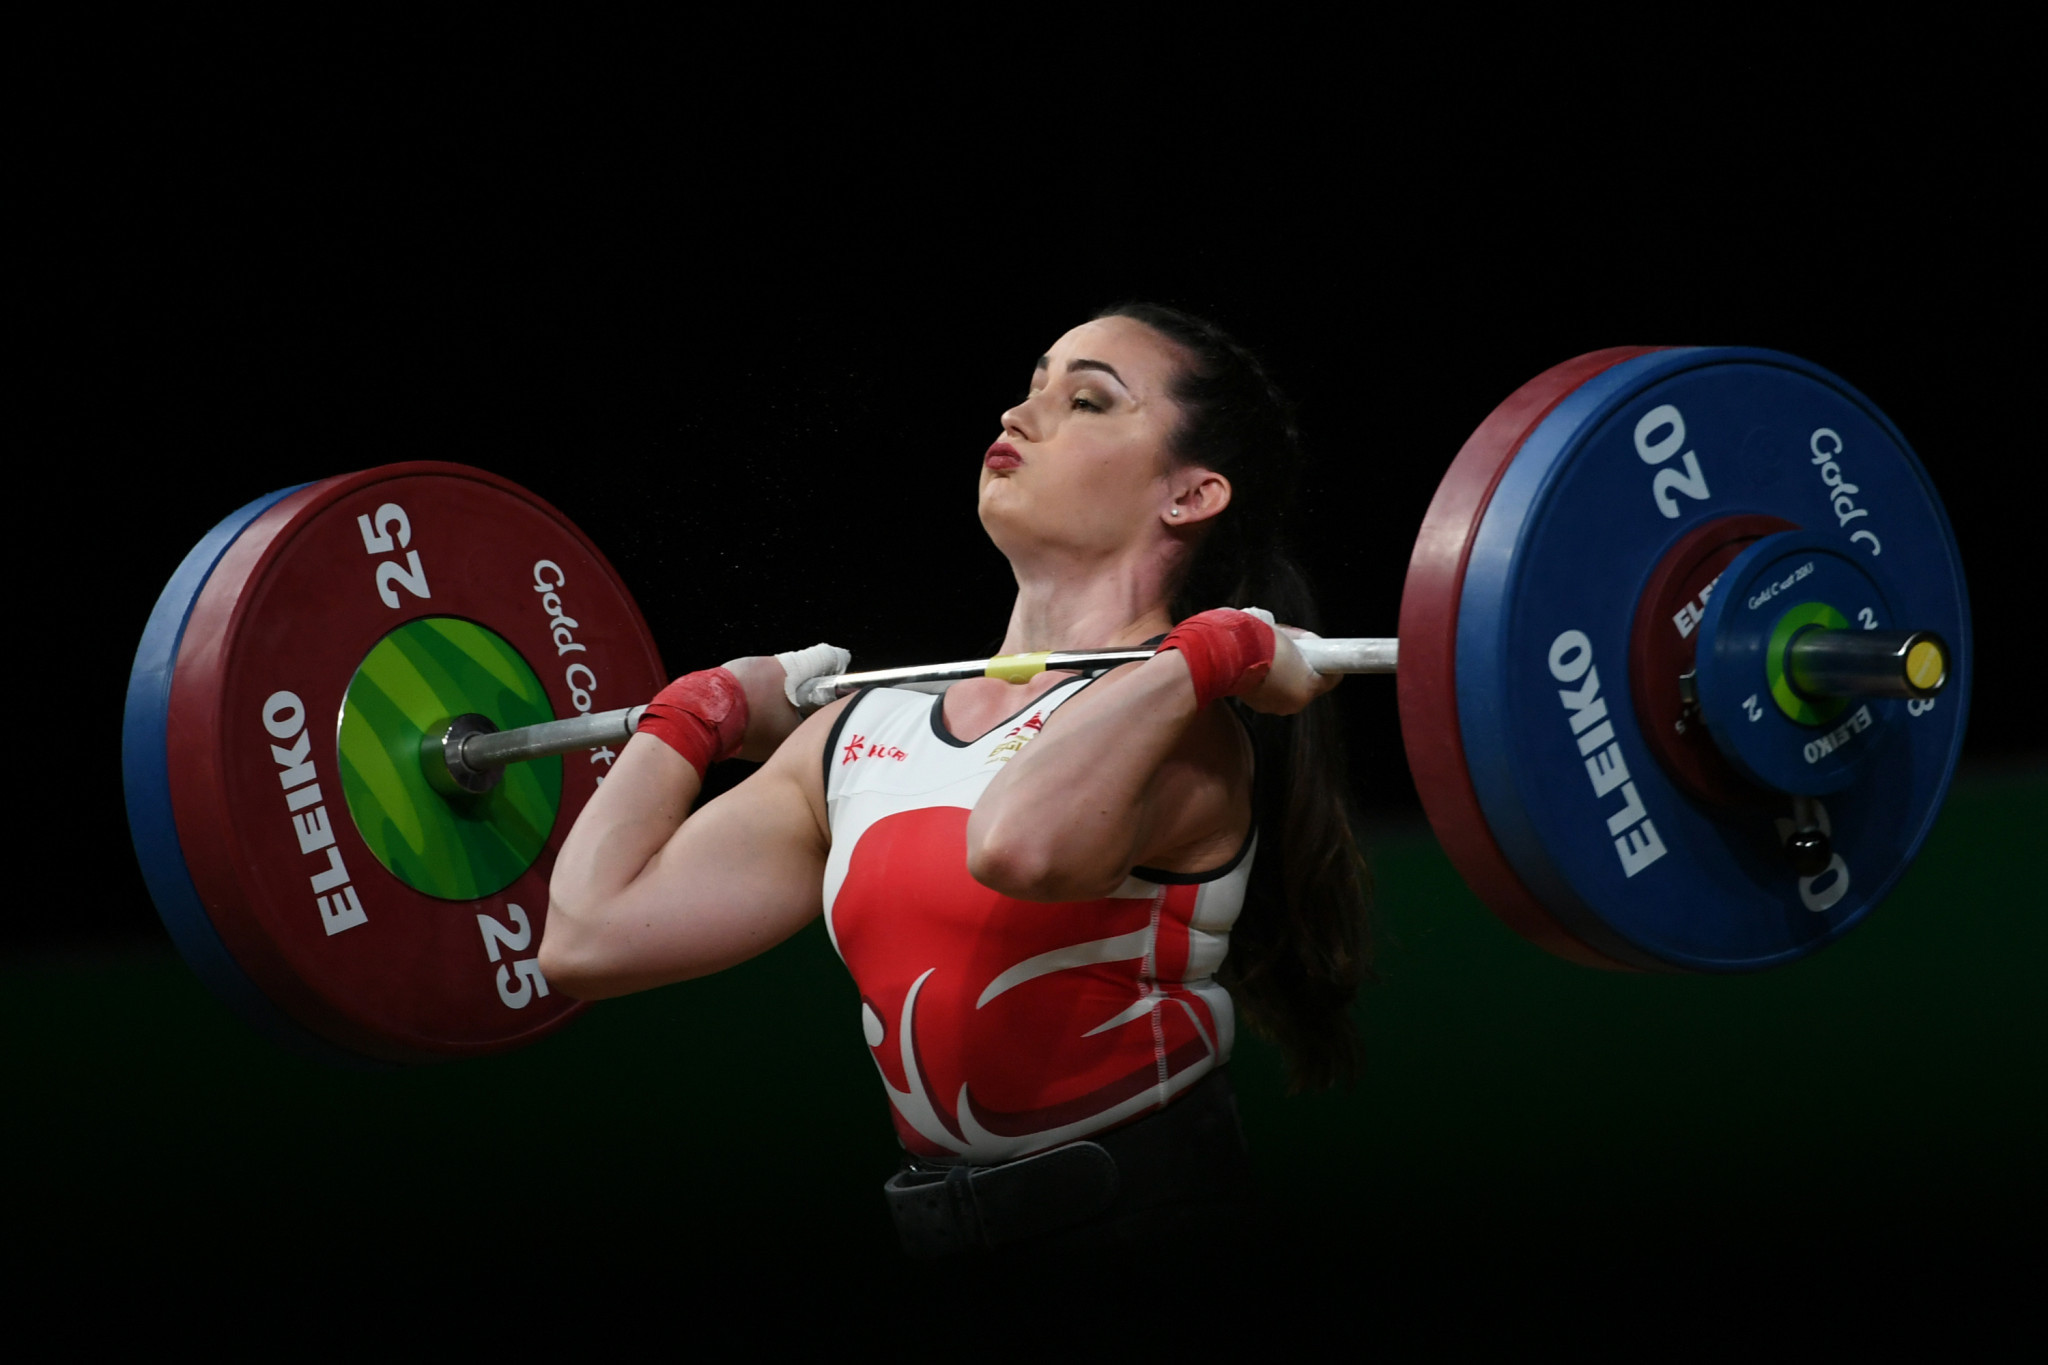 Davies resigns from IWF Board and weightlifters' leadership role following BWL disciplinary hearing